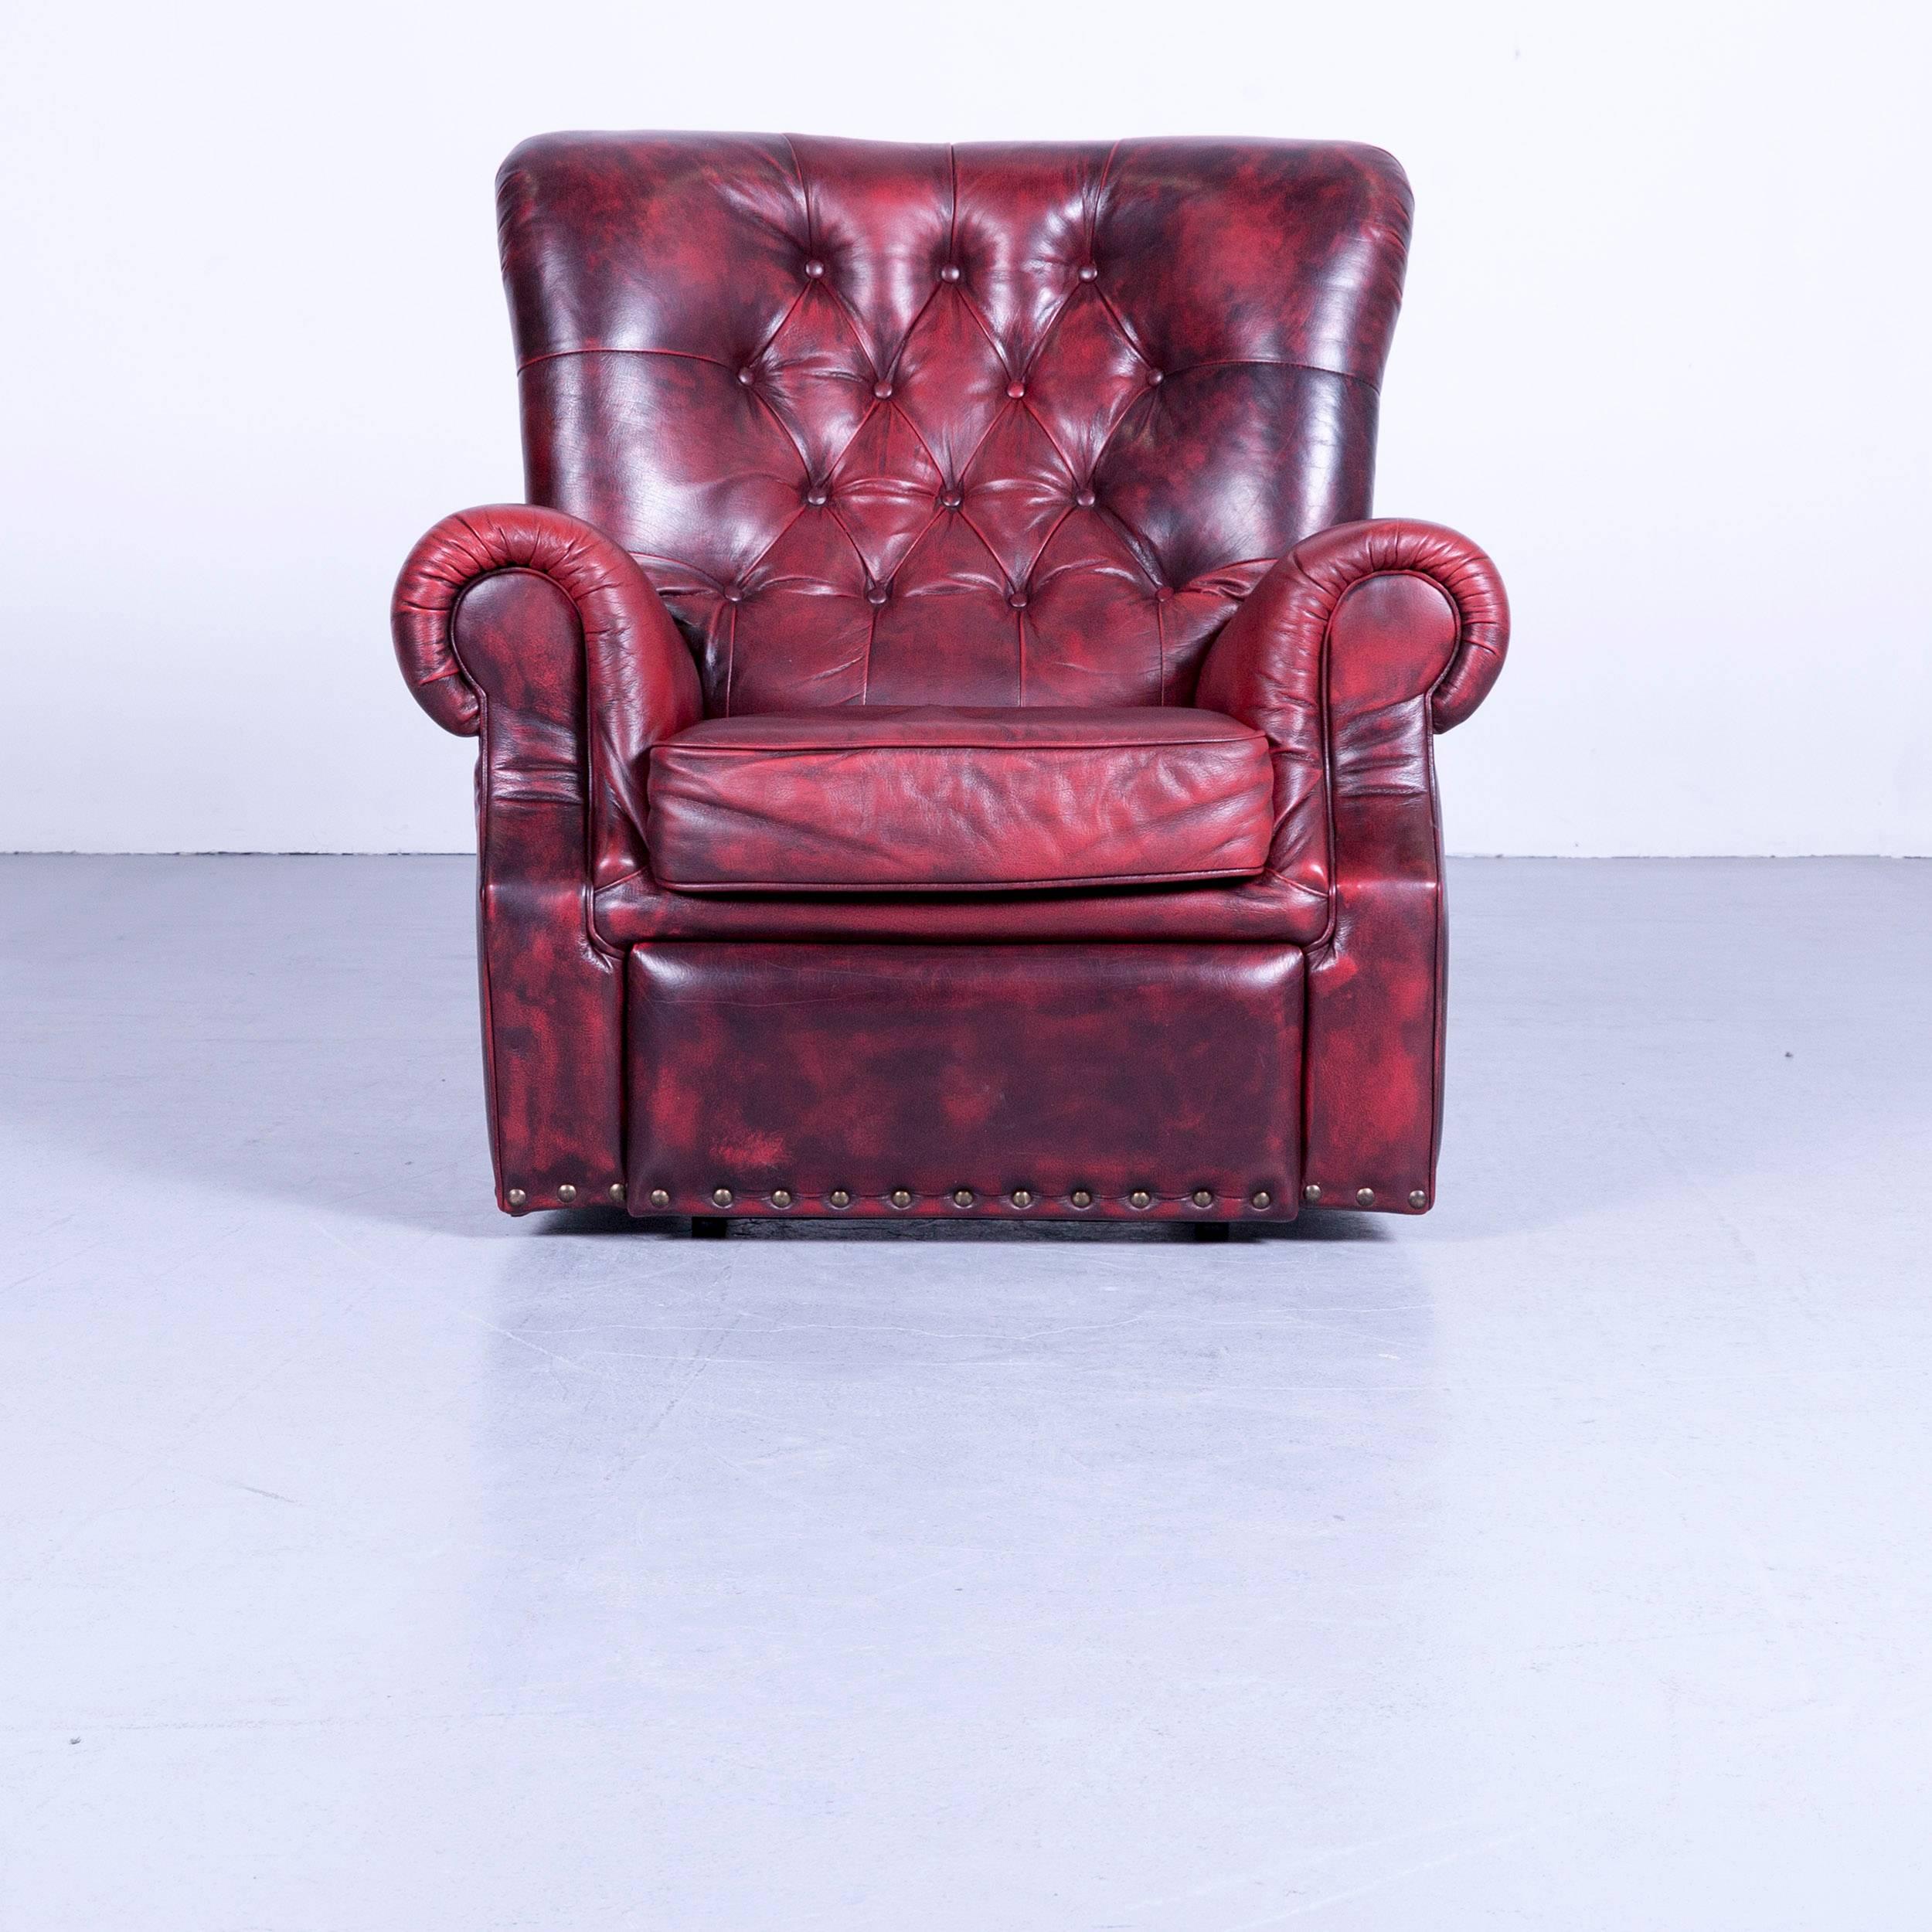 Chesterfield armchair oxblood red leather buttoned recliner function vintage.